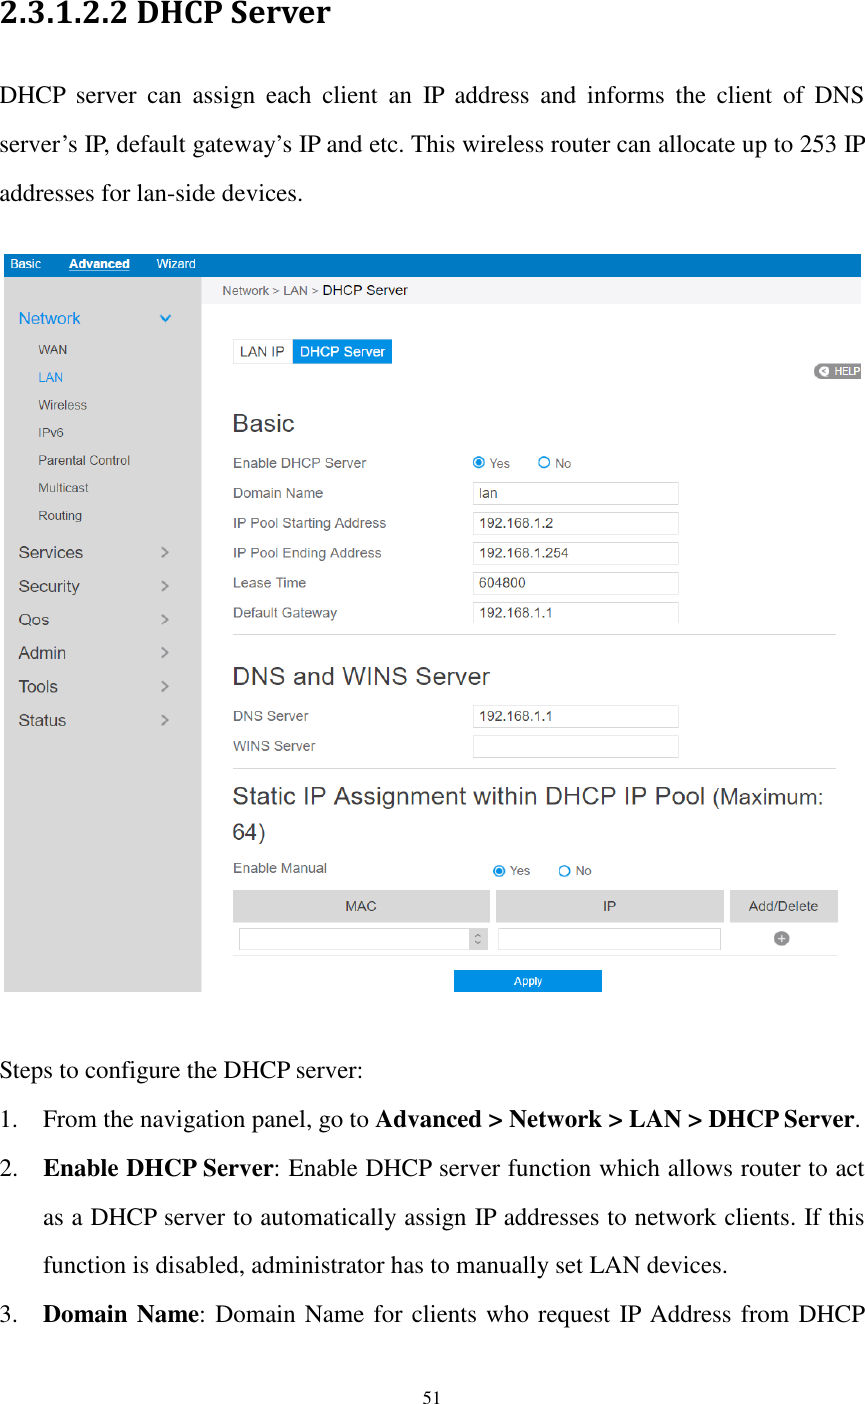  51  2.3.1.2.2 DHCP Server DHCP  server  can  assign  each  client  an  IP  address  and  informs  the  client  of  DNS server’s IP, default gateway’s IP and etc. This wireless router can allocate up to 253 IP addresses for lan-side devices.    Steps to configure the DHCP server:   1. From the navigation panel, go to Advanced &gt; Network &gt; LAN &gt; DHCP Server. 2. Enable DHCP Server: Enable DHCP server function which allows router to act as a DHCP server to automatically assign IP addresses to network clients. If this function is disabled, administrator has to manually set LAN devices. 3. Domain Name: Domain Name for clients who request IP Address from DHCP 